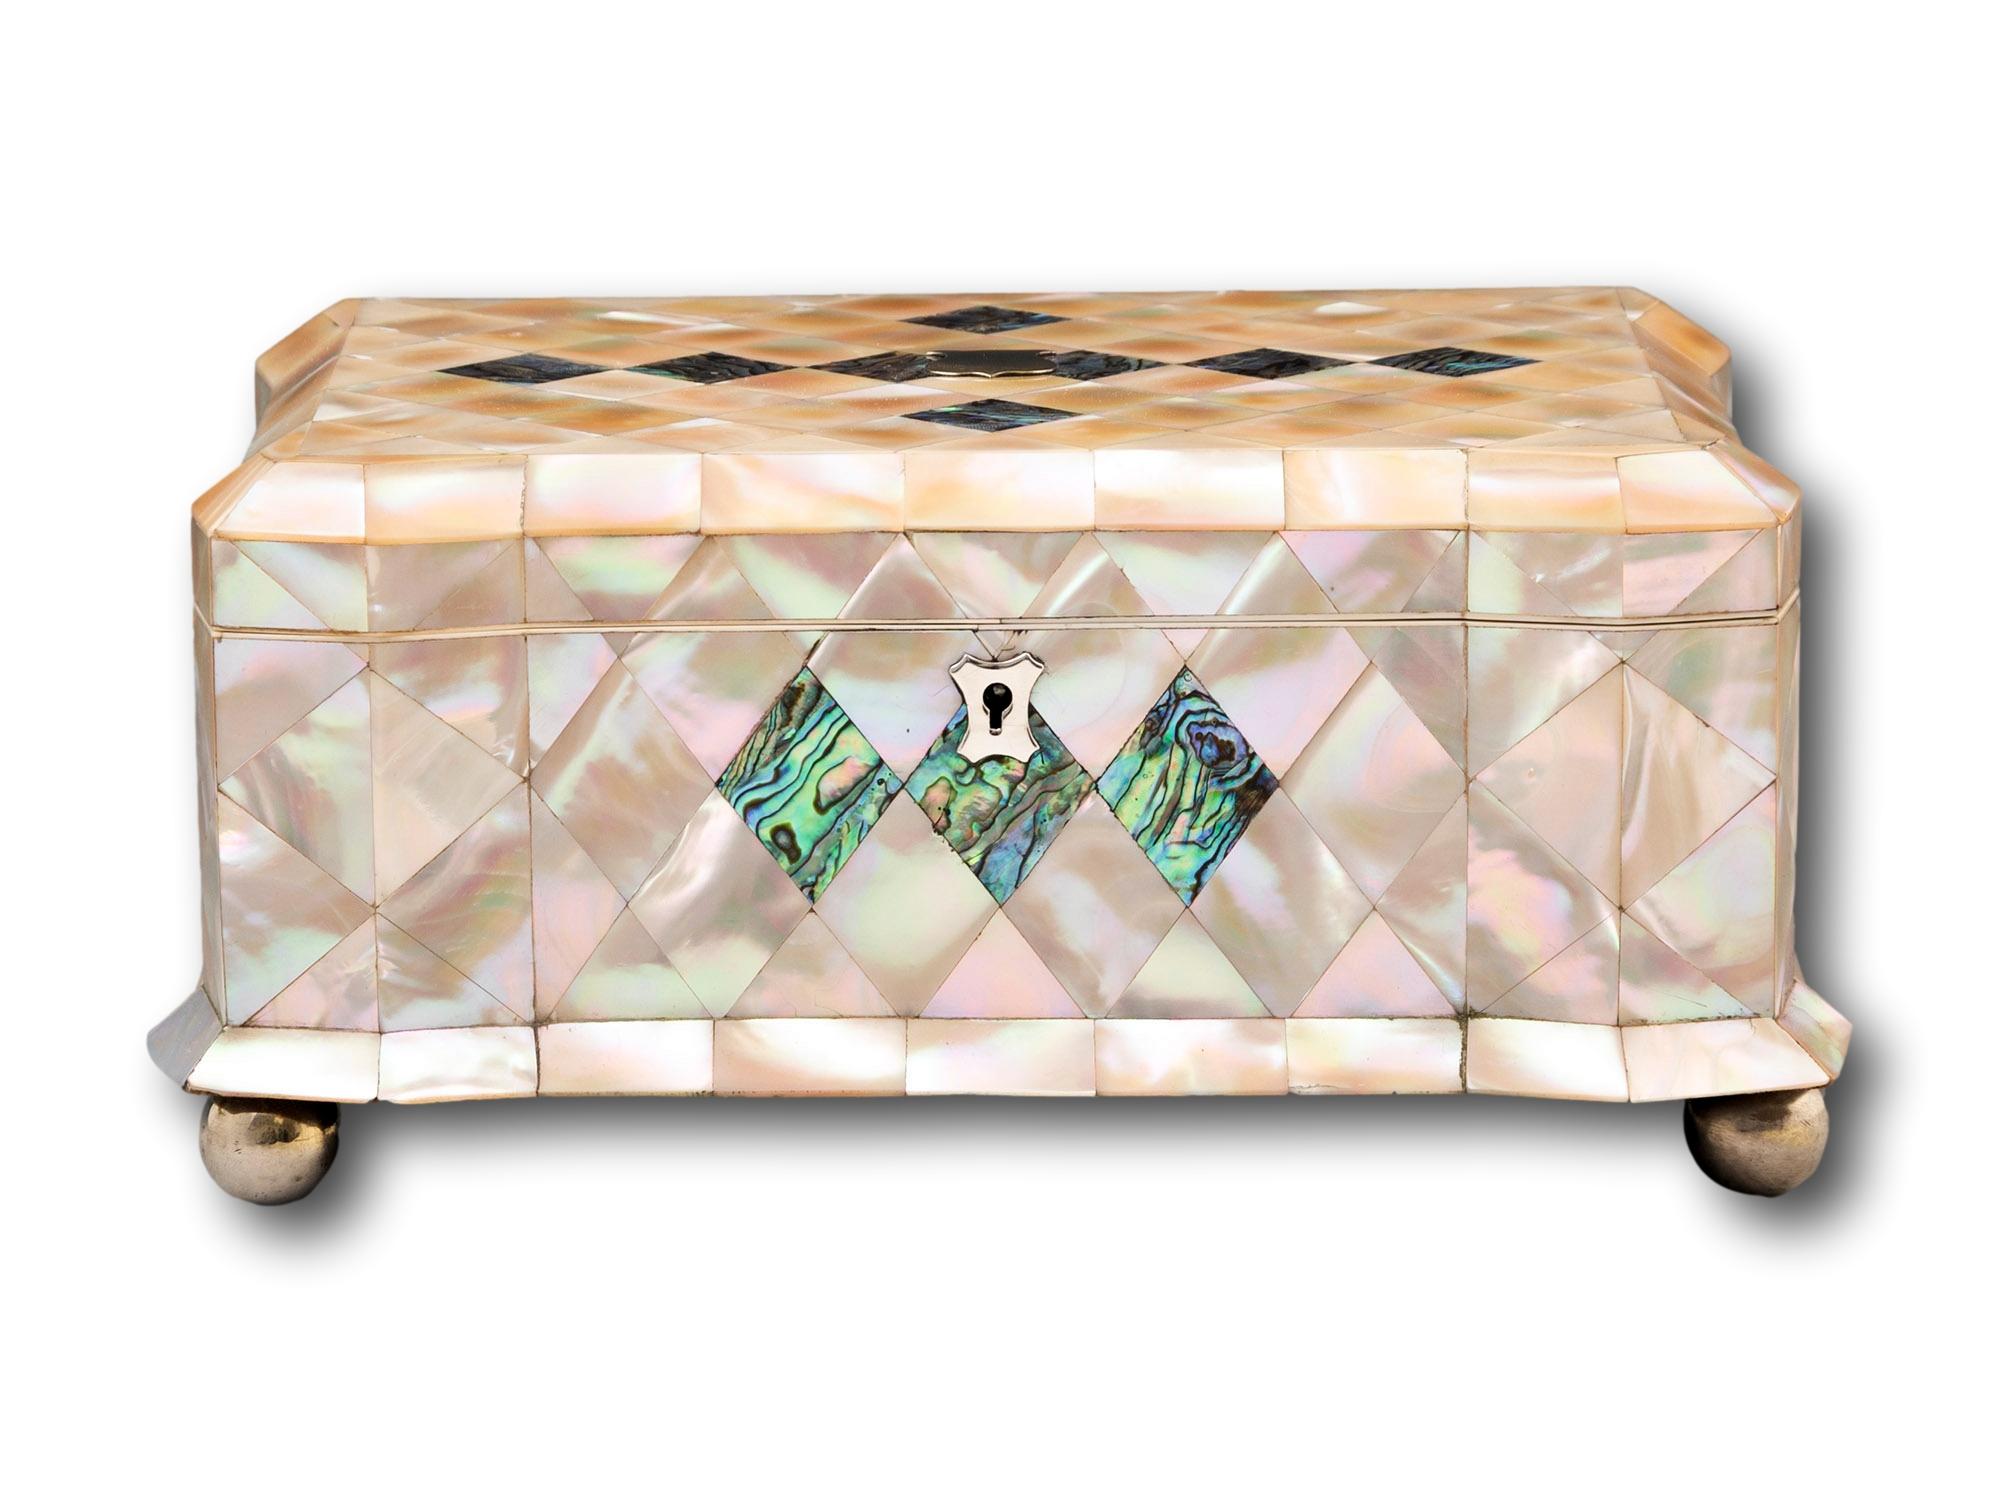 Georgian 19th Century Jewellery Box

From our Jewellery Box collection, we are delighted to offer this Georgian Mother of Pearl Jewellery Box. The Jewellery Box of rectangular shape with faceted pillar corners, and a spread plinth base stood upon